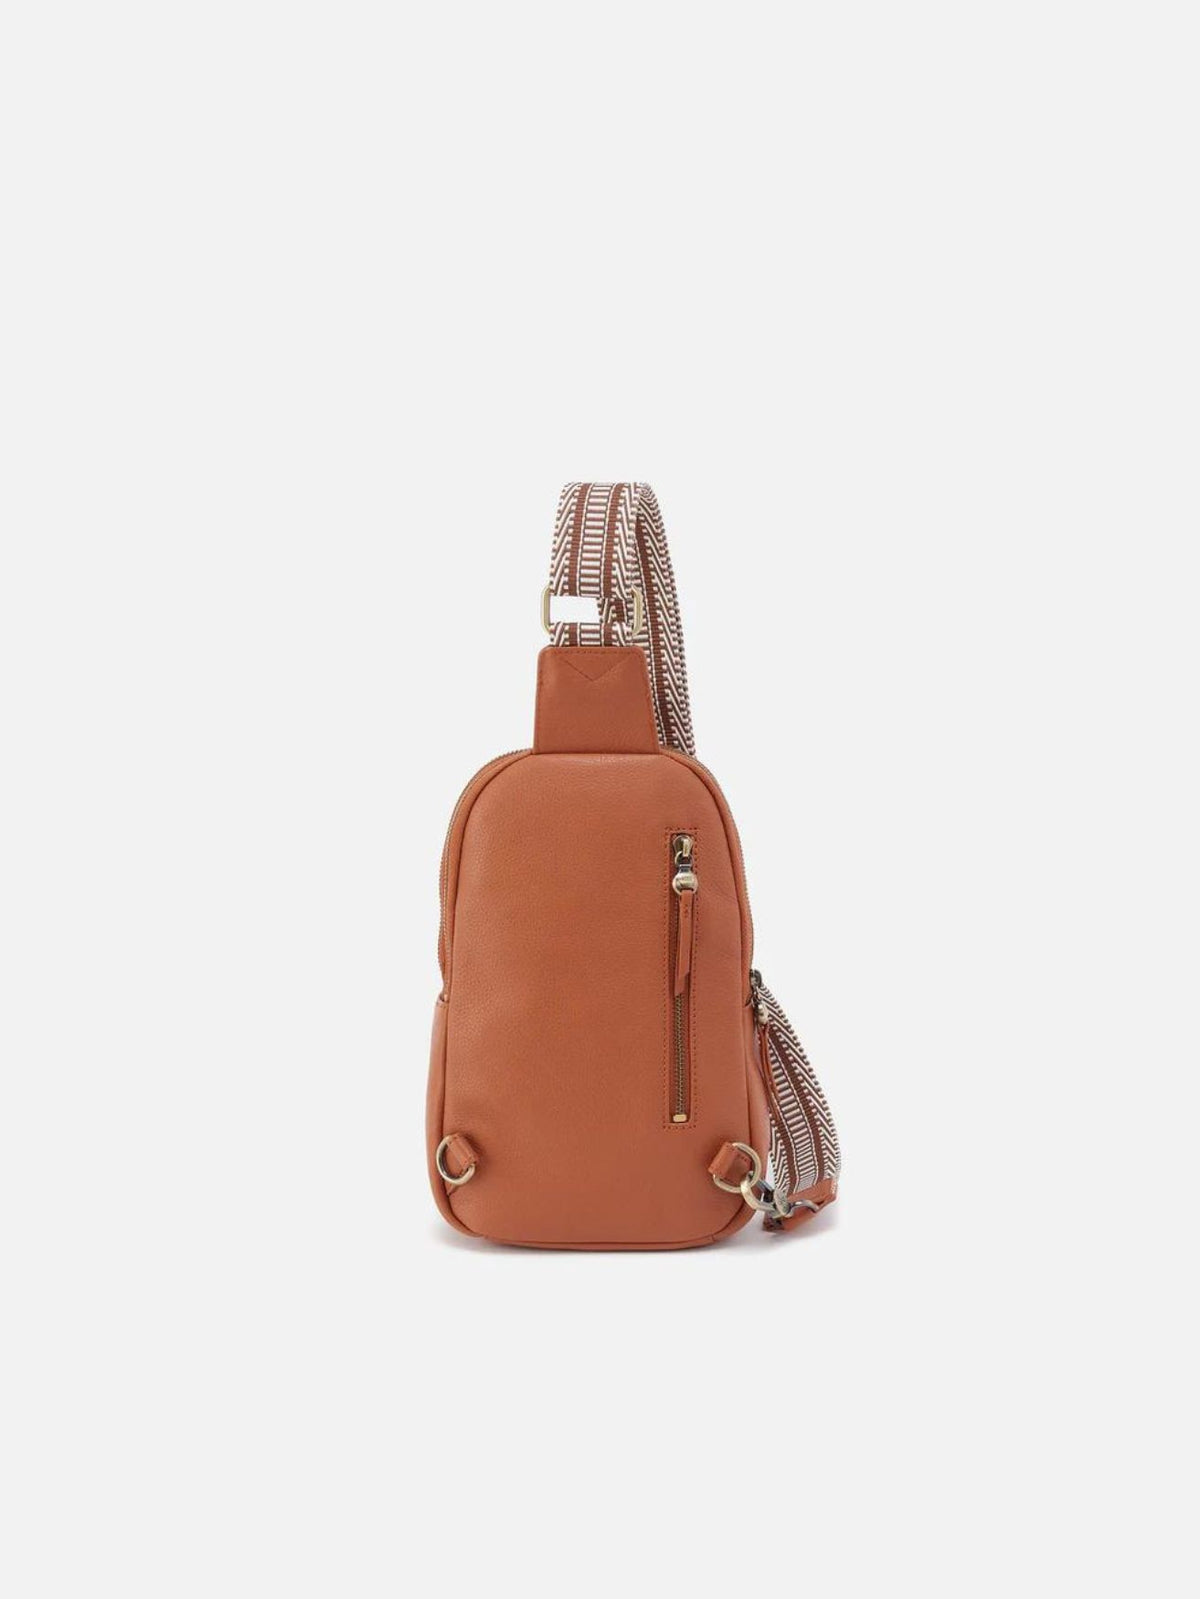 hobo cass pebbled leather sling bag in butterscotch-back